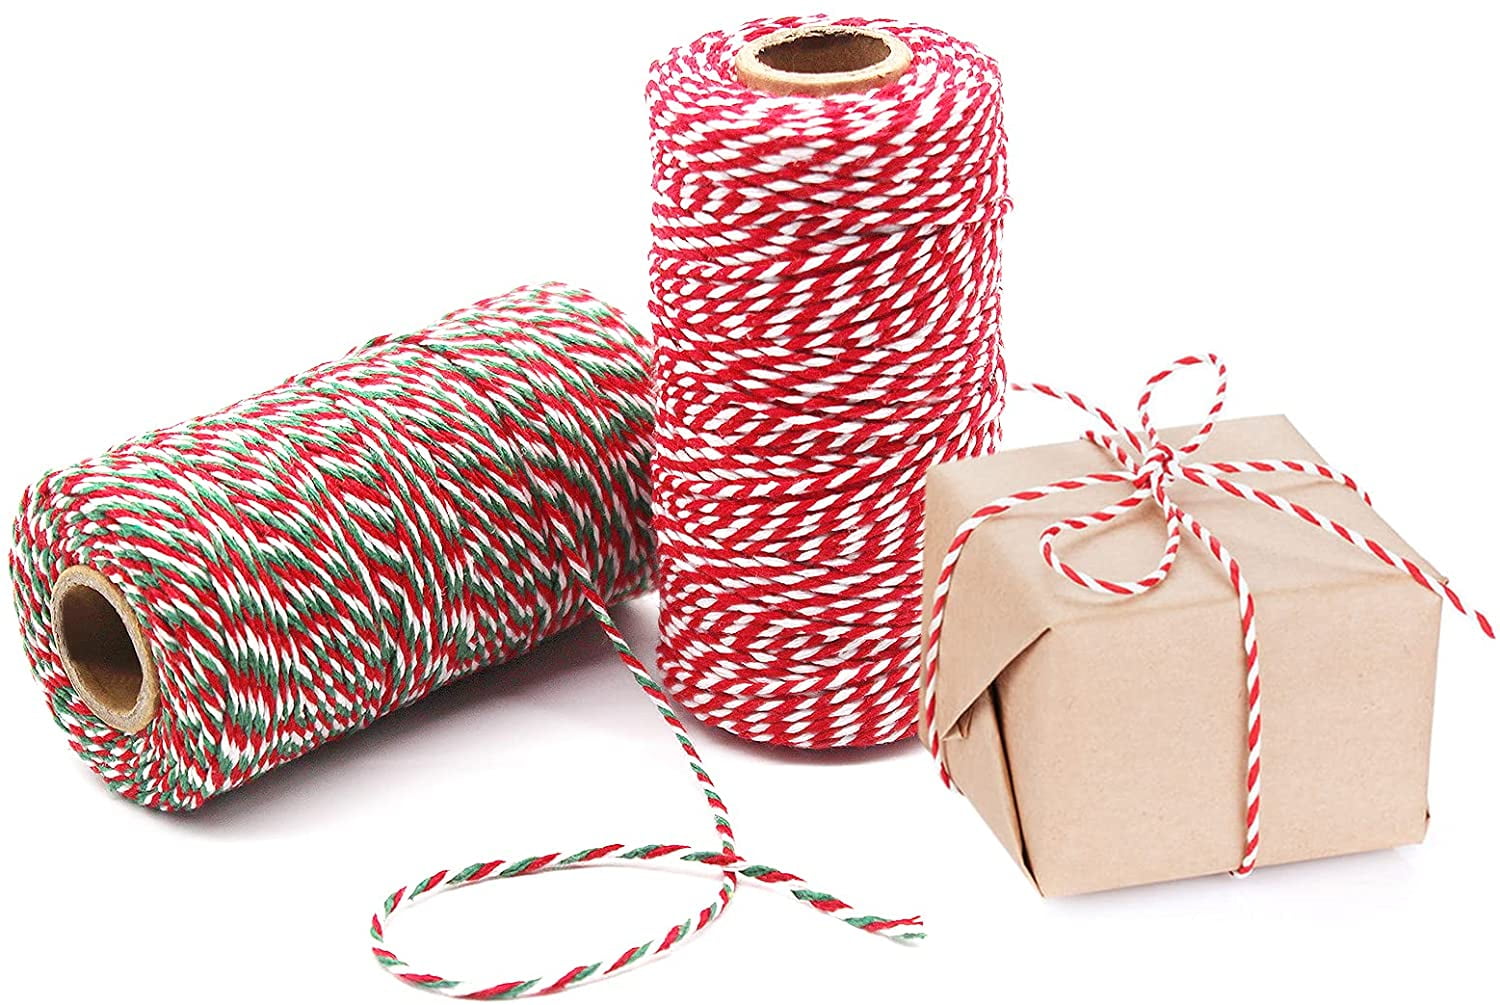 Christmas Gift Wrapping Cotton String Crafts and Holiday Decorations Tpyx Green and White Twine 656 Feet 200 m Cotton Baker Twine